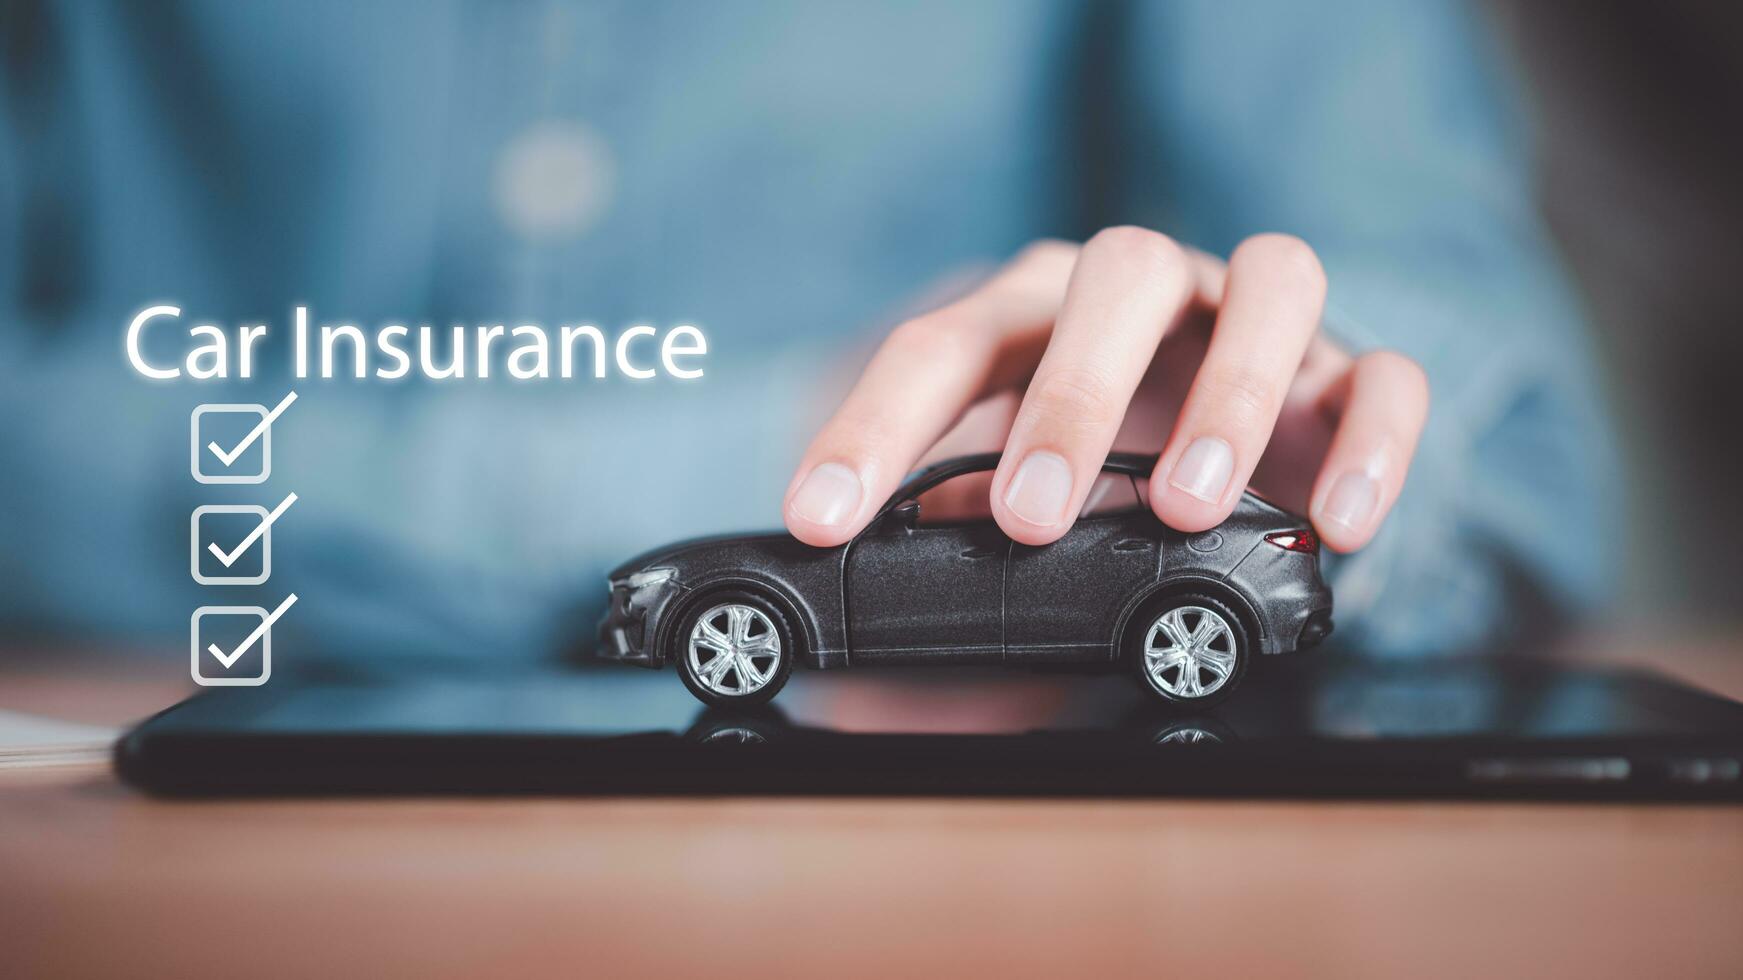 The concept of insurance for the protection of life and property ,savings for car purchase goals ,Money Growth Planning ,Preventing hazards and reducing unexpected risks ,insurance business photo